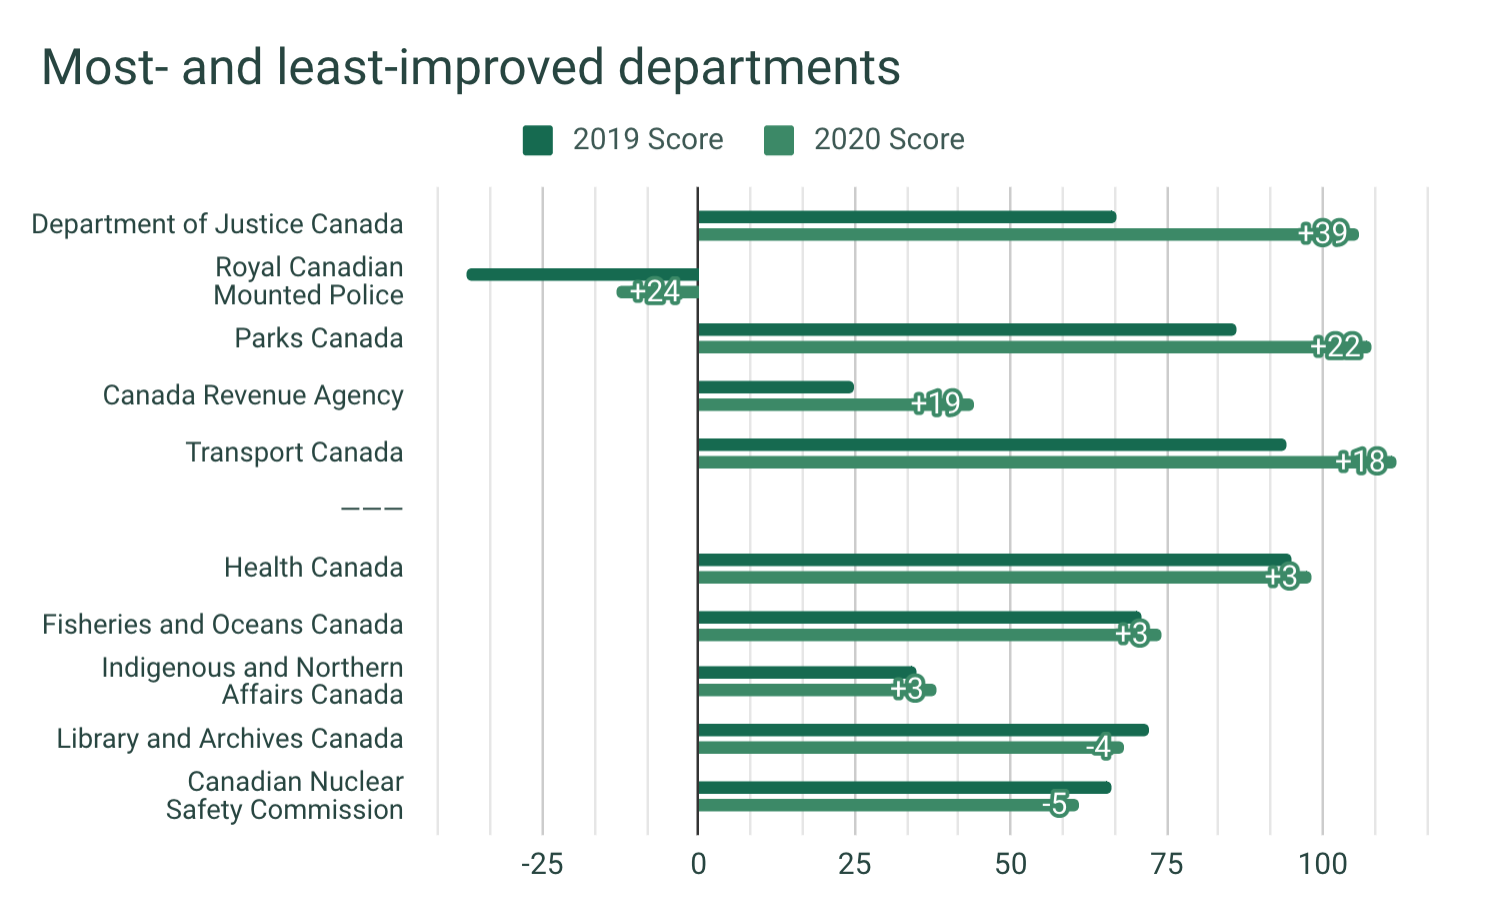 A bar chart that compares the 2019 and 2020 scores of the departments that improved the most and improved the least. The Department of Justice improved by +39, the Royal Canadian Mounted Police (despite its low overall score) improved by +24. The Canadian Nuclear Safety Commission went down by minus 5, and Library and Archives Canada went down by minus 4.